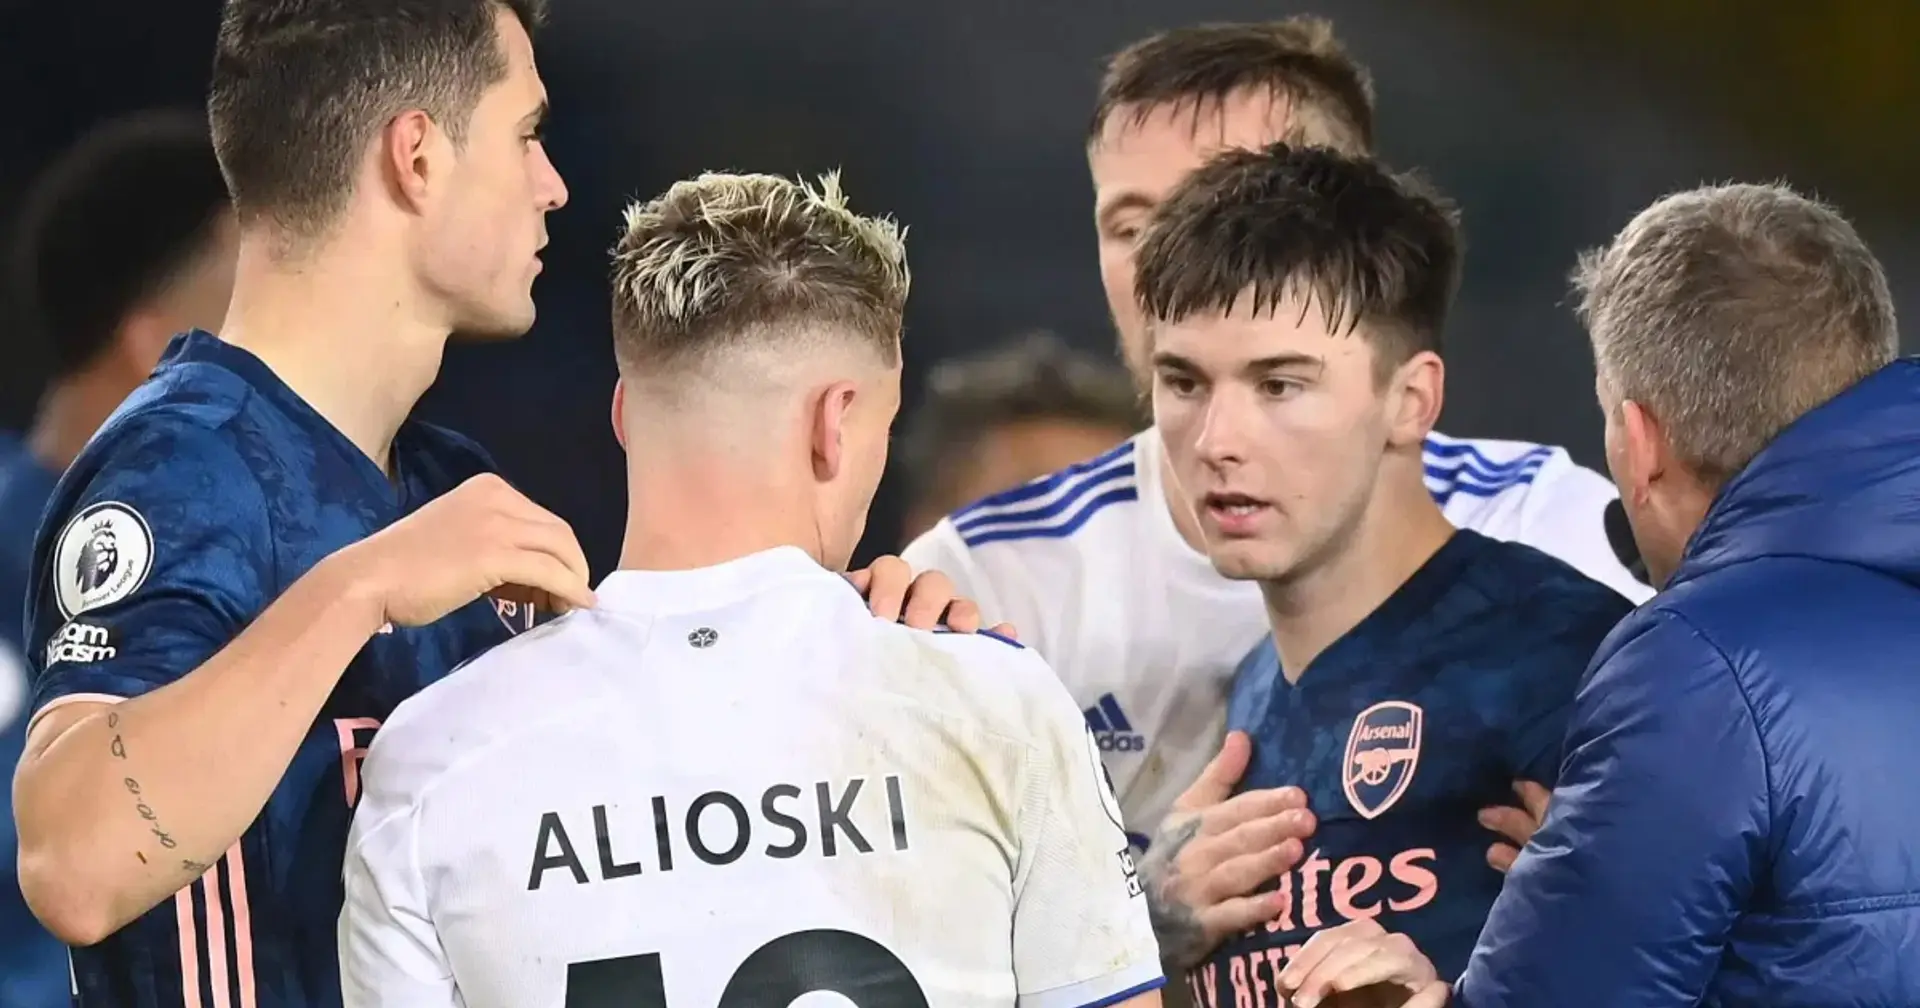 'Soul of a lion', 'At least someone has the balls to do it': fans firmly on Tierney's side after he confronts Alioski